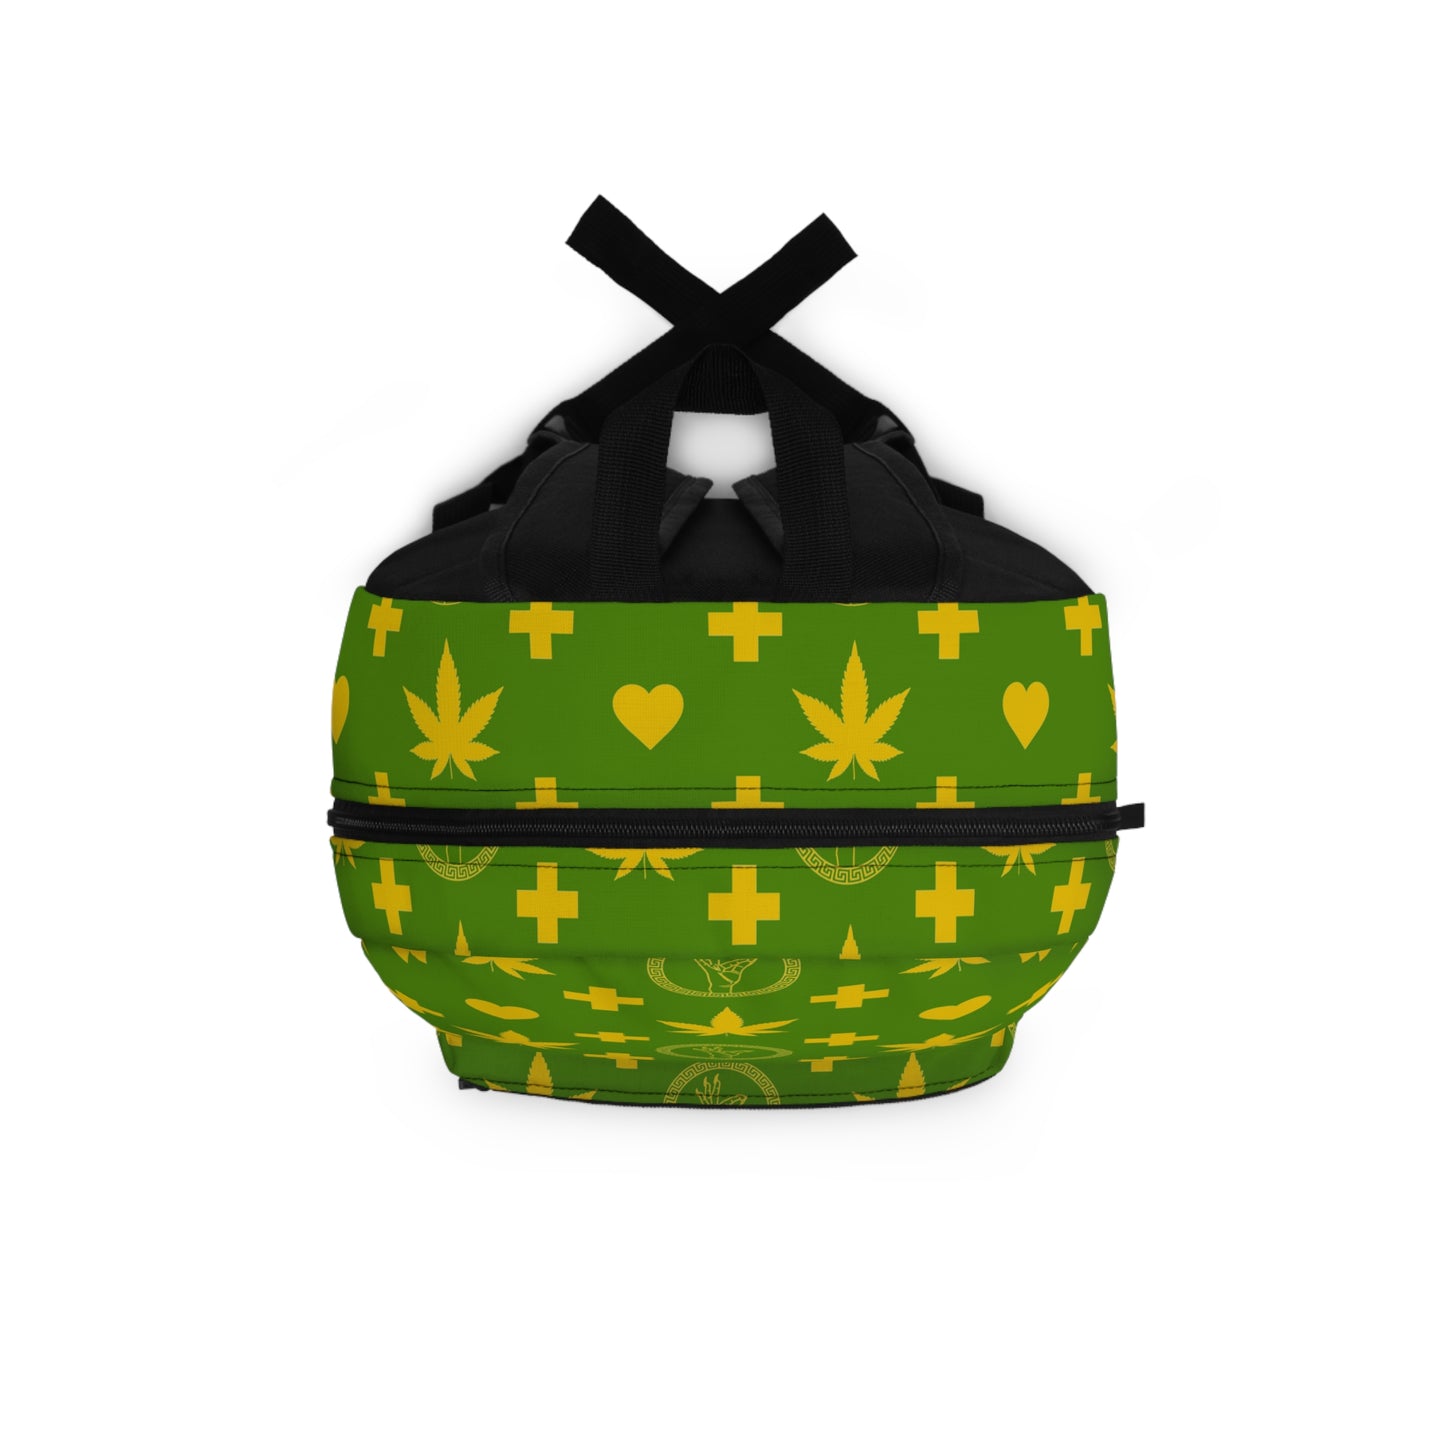 "Medallion Herb Couture" Backpack